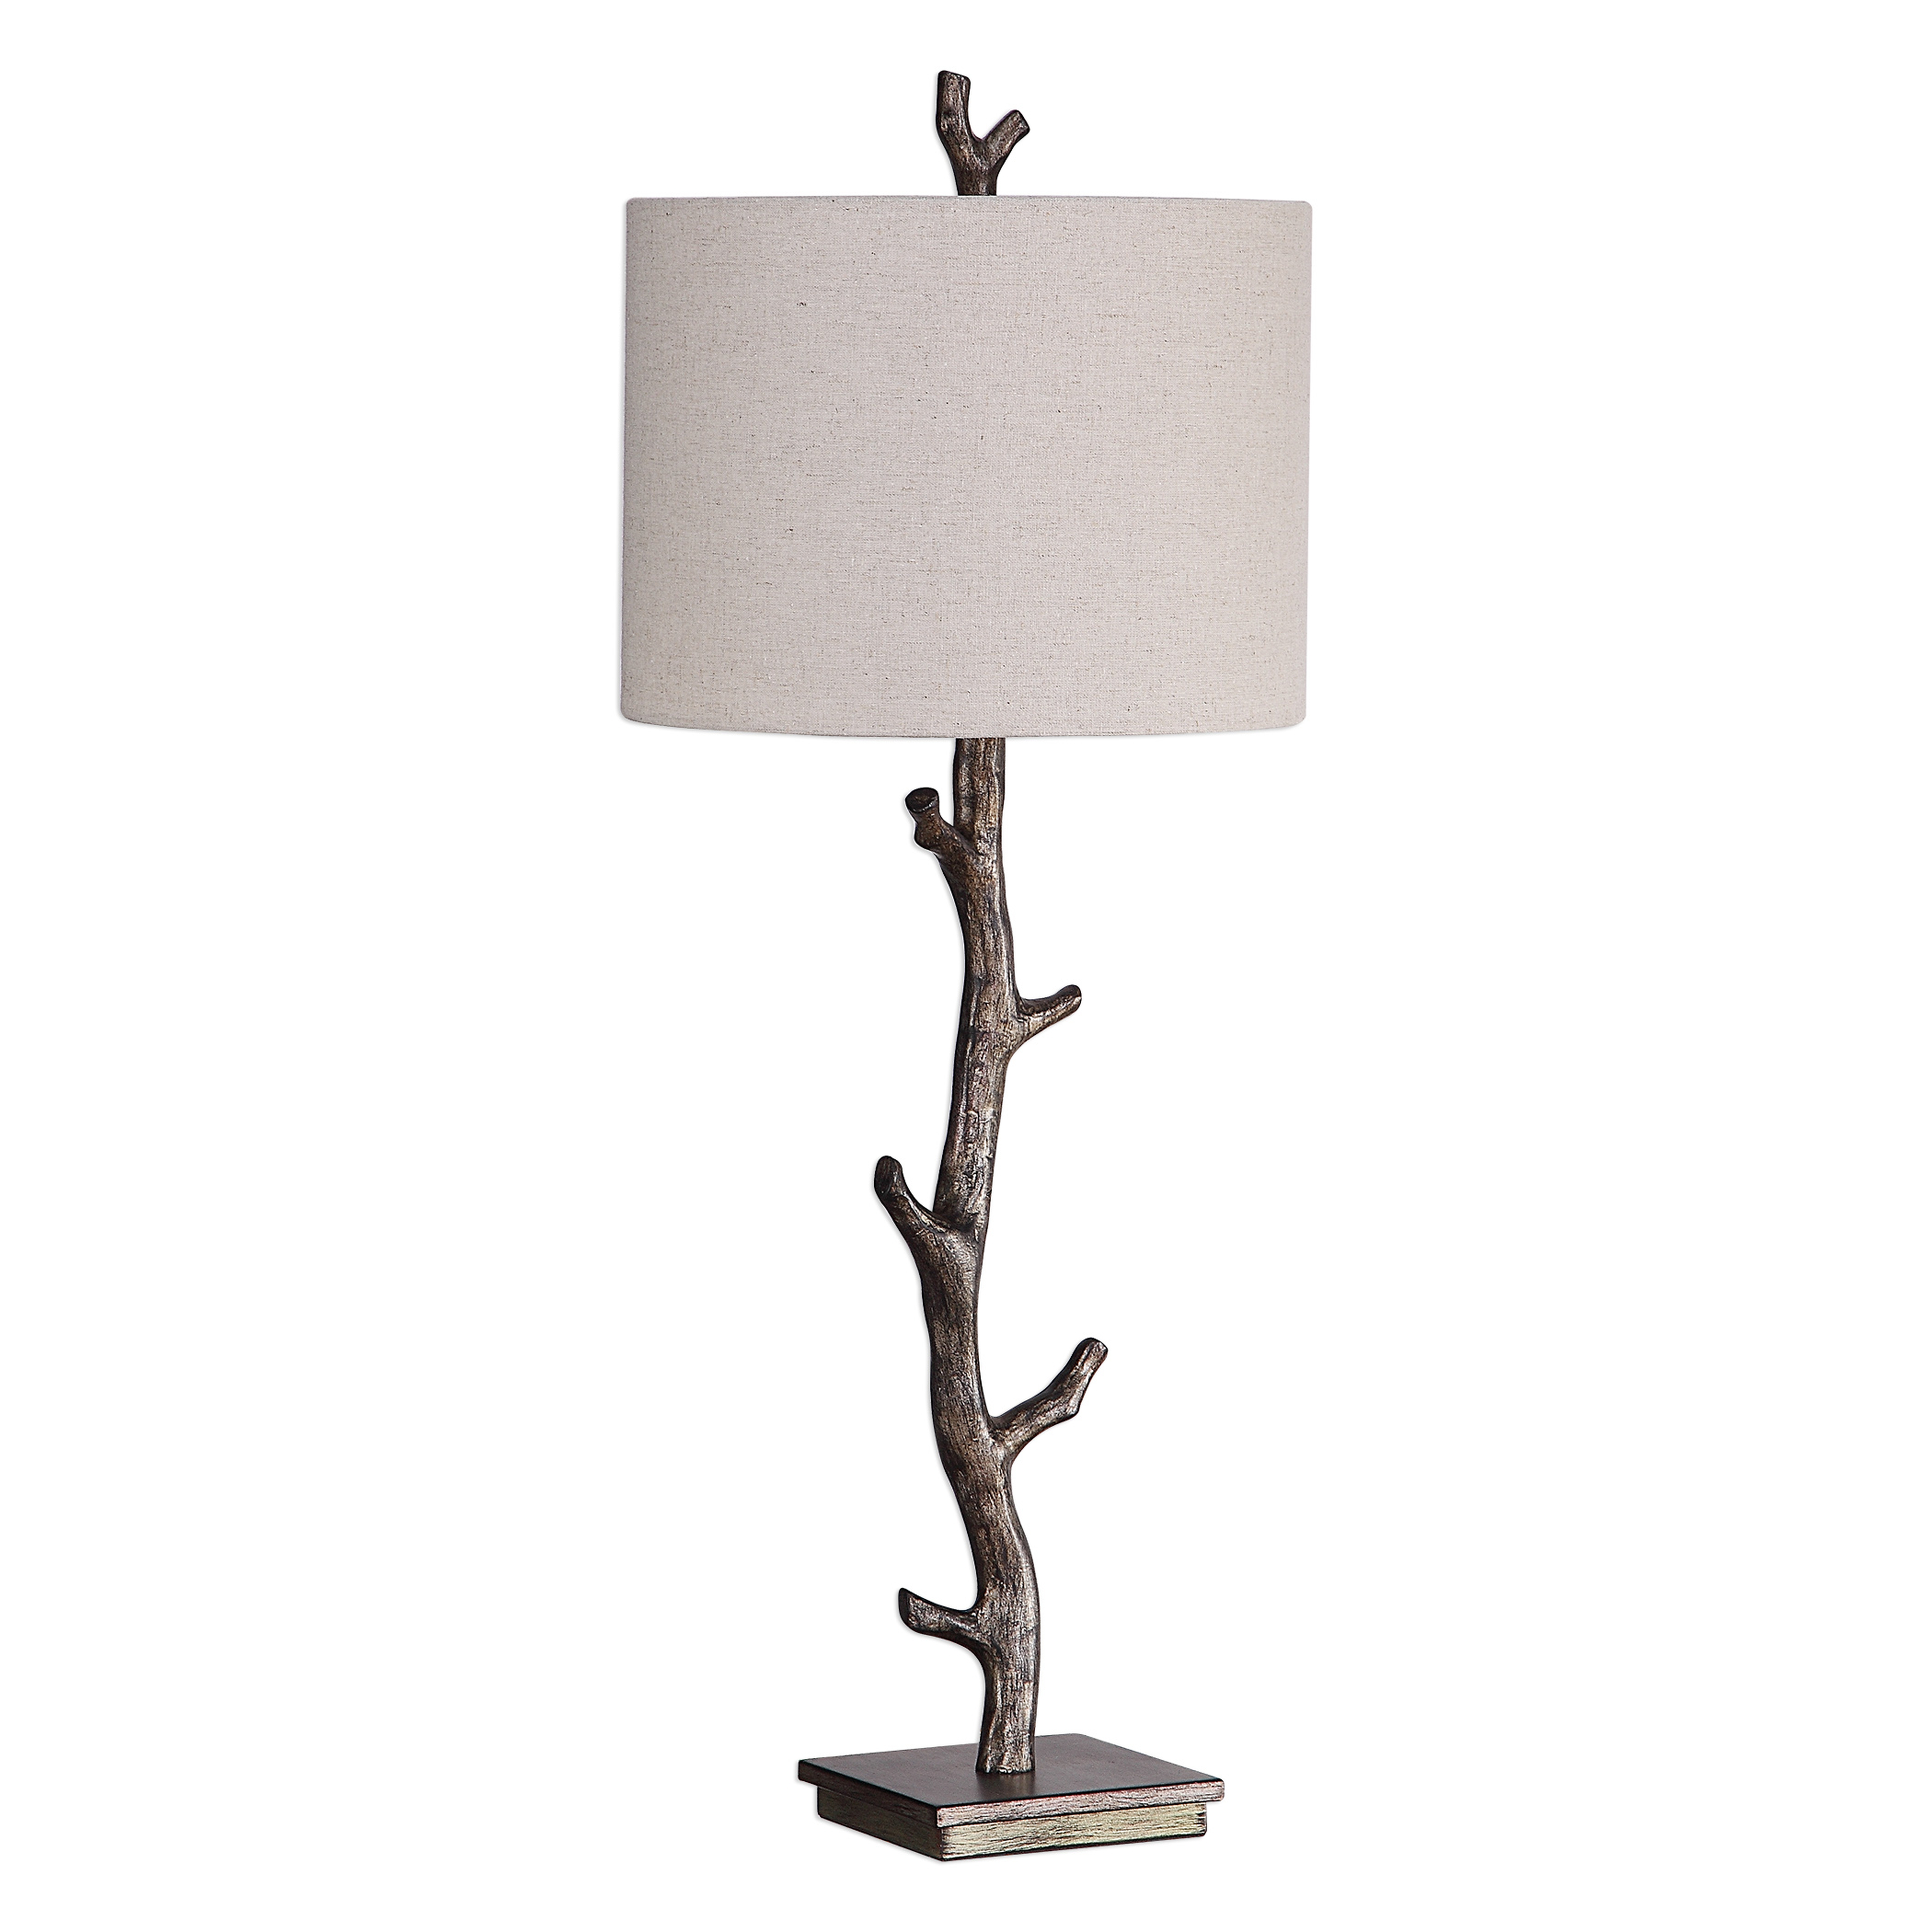 TABLE LAMP - Hudsonhill Foundry